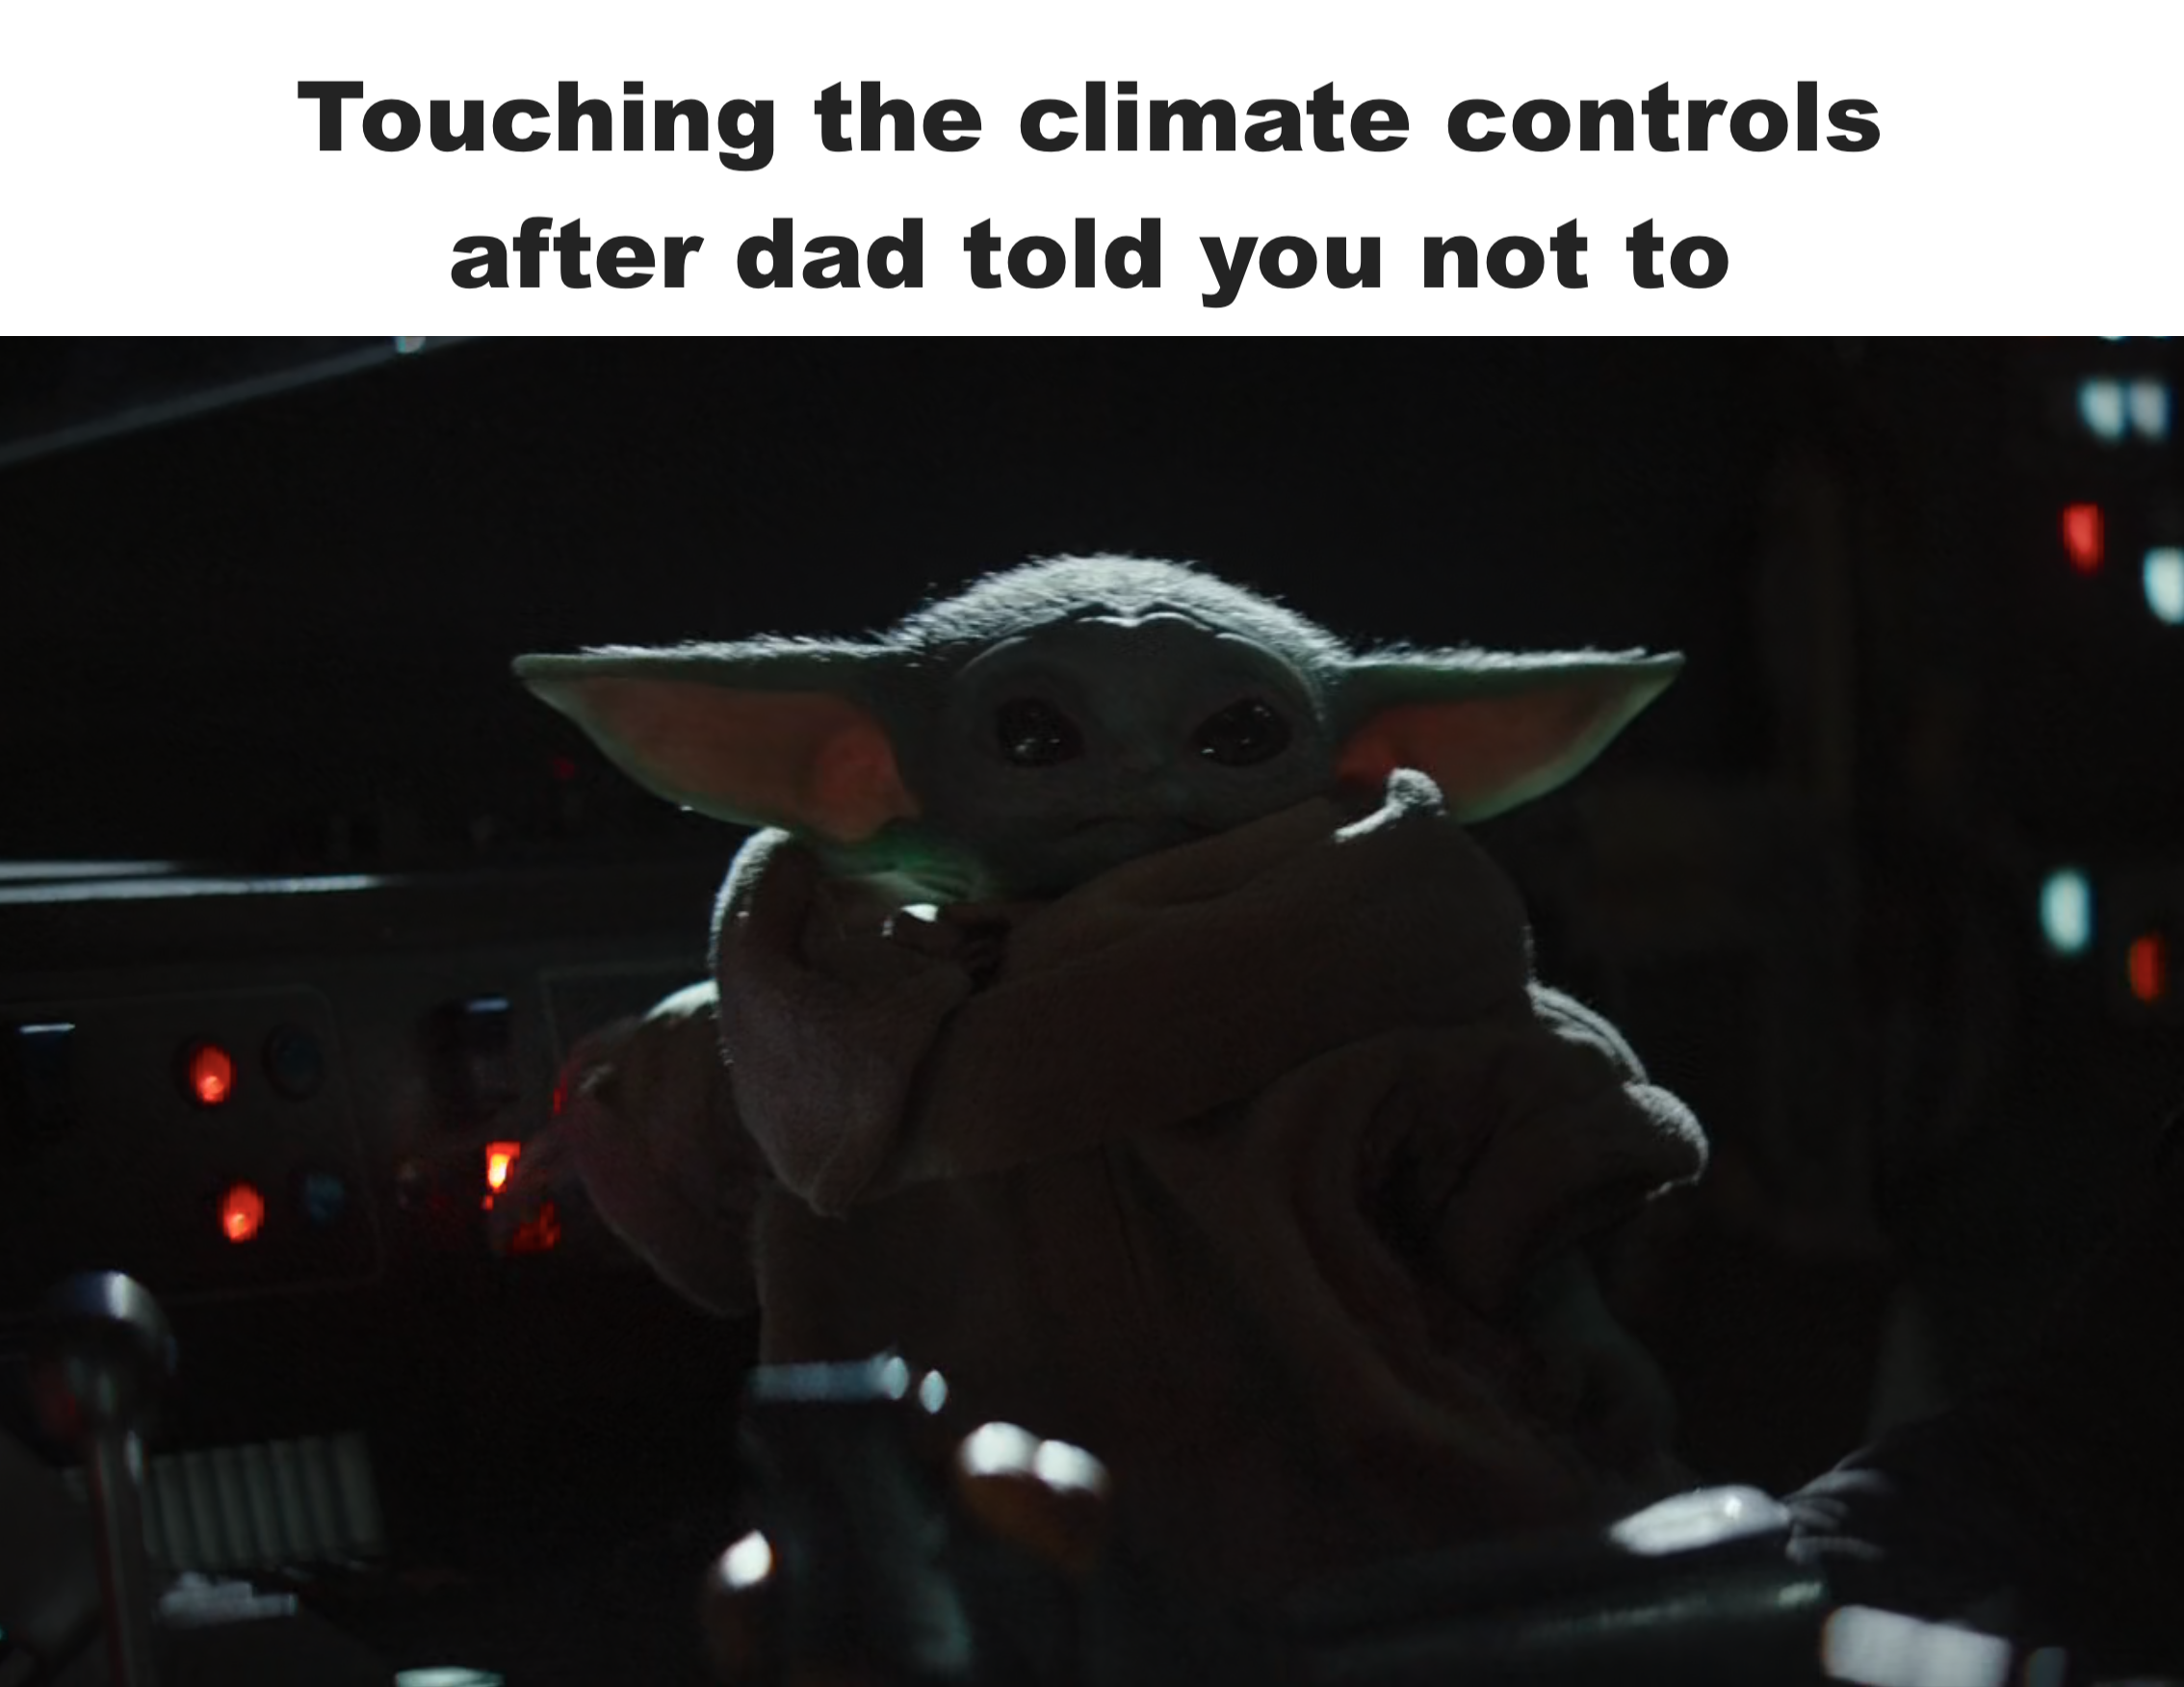 Yoda - Touching the climate controls after dad told you not to